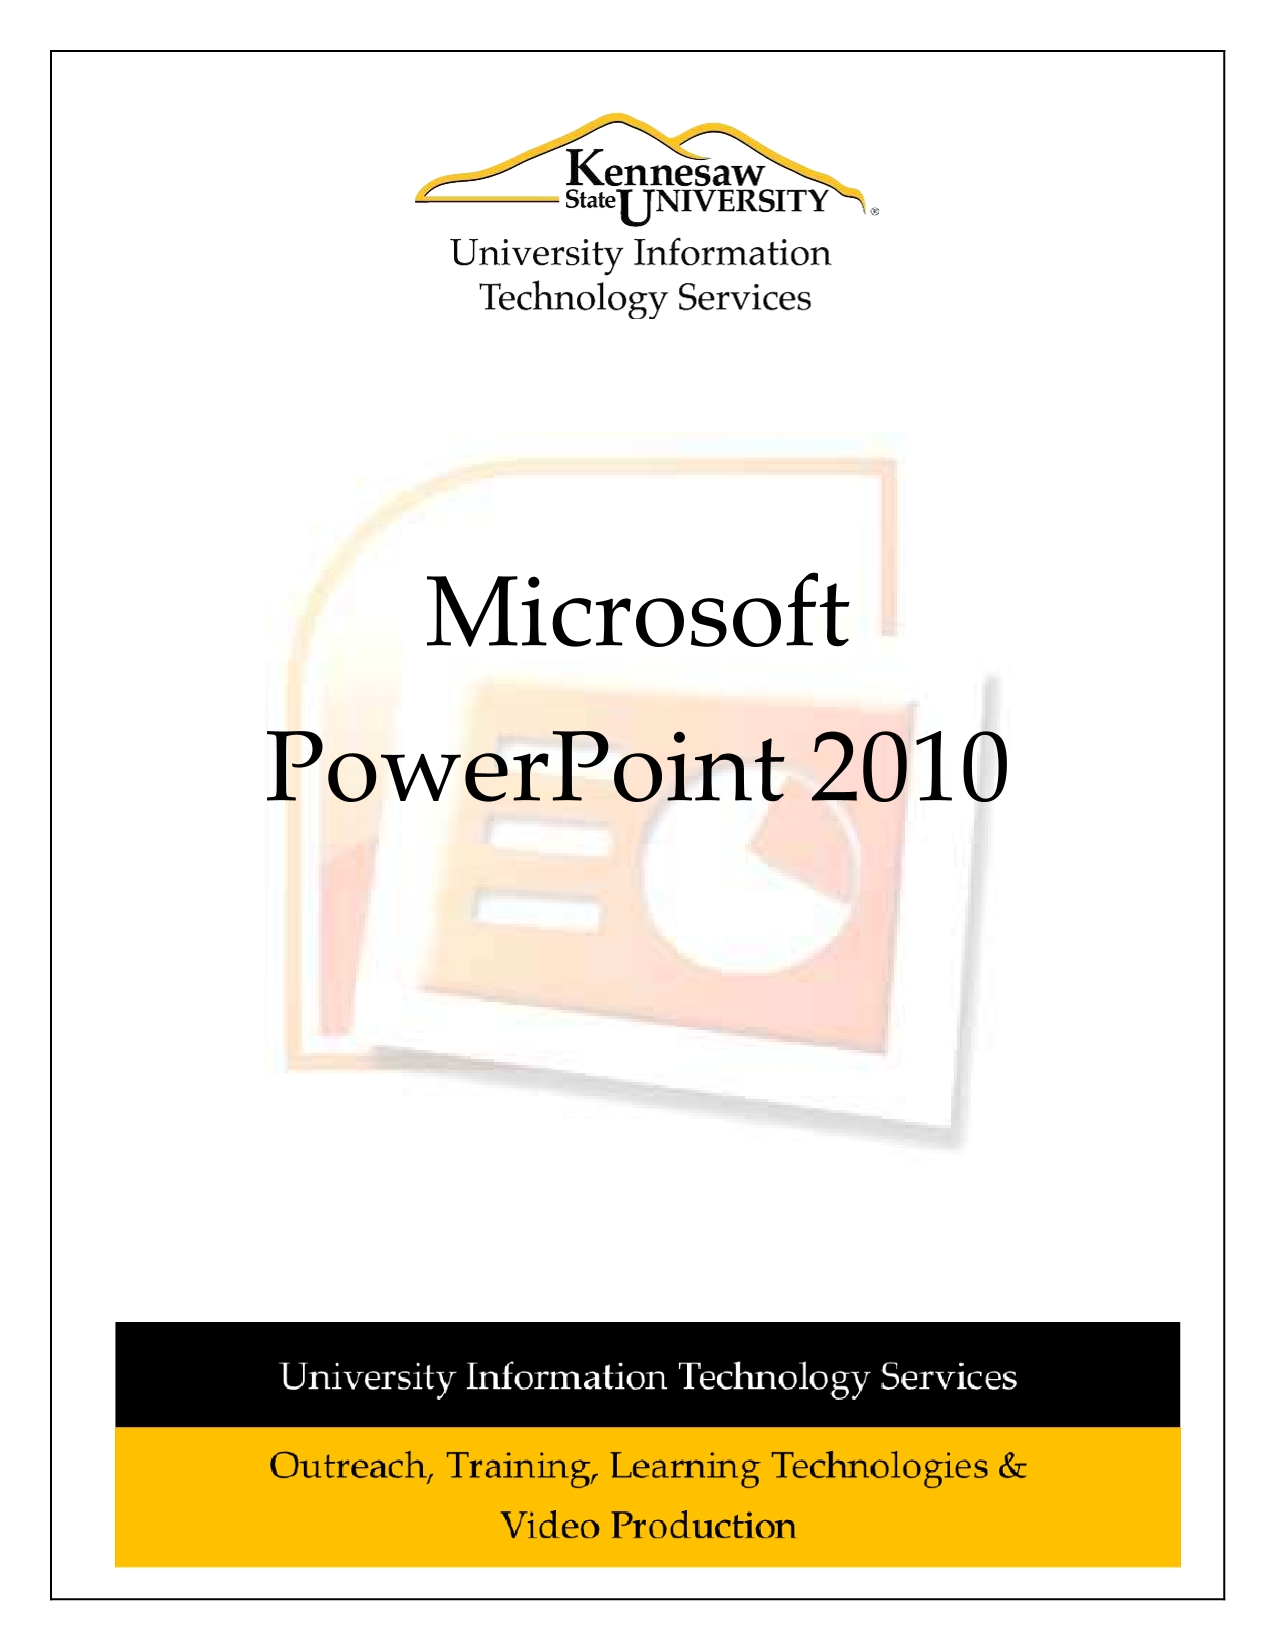 Powerpoint 2010 creating a presentation